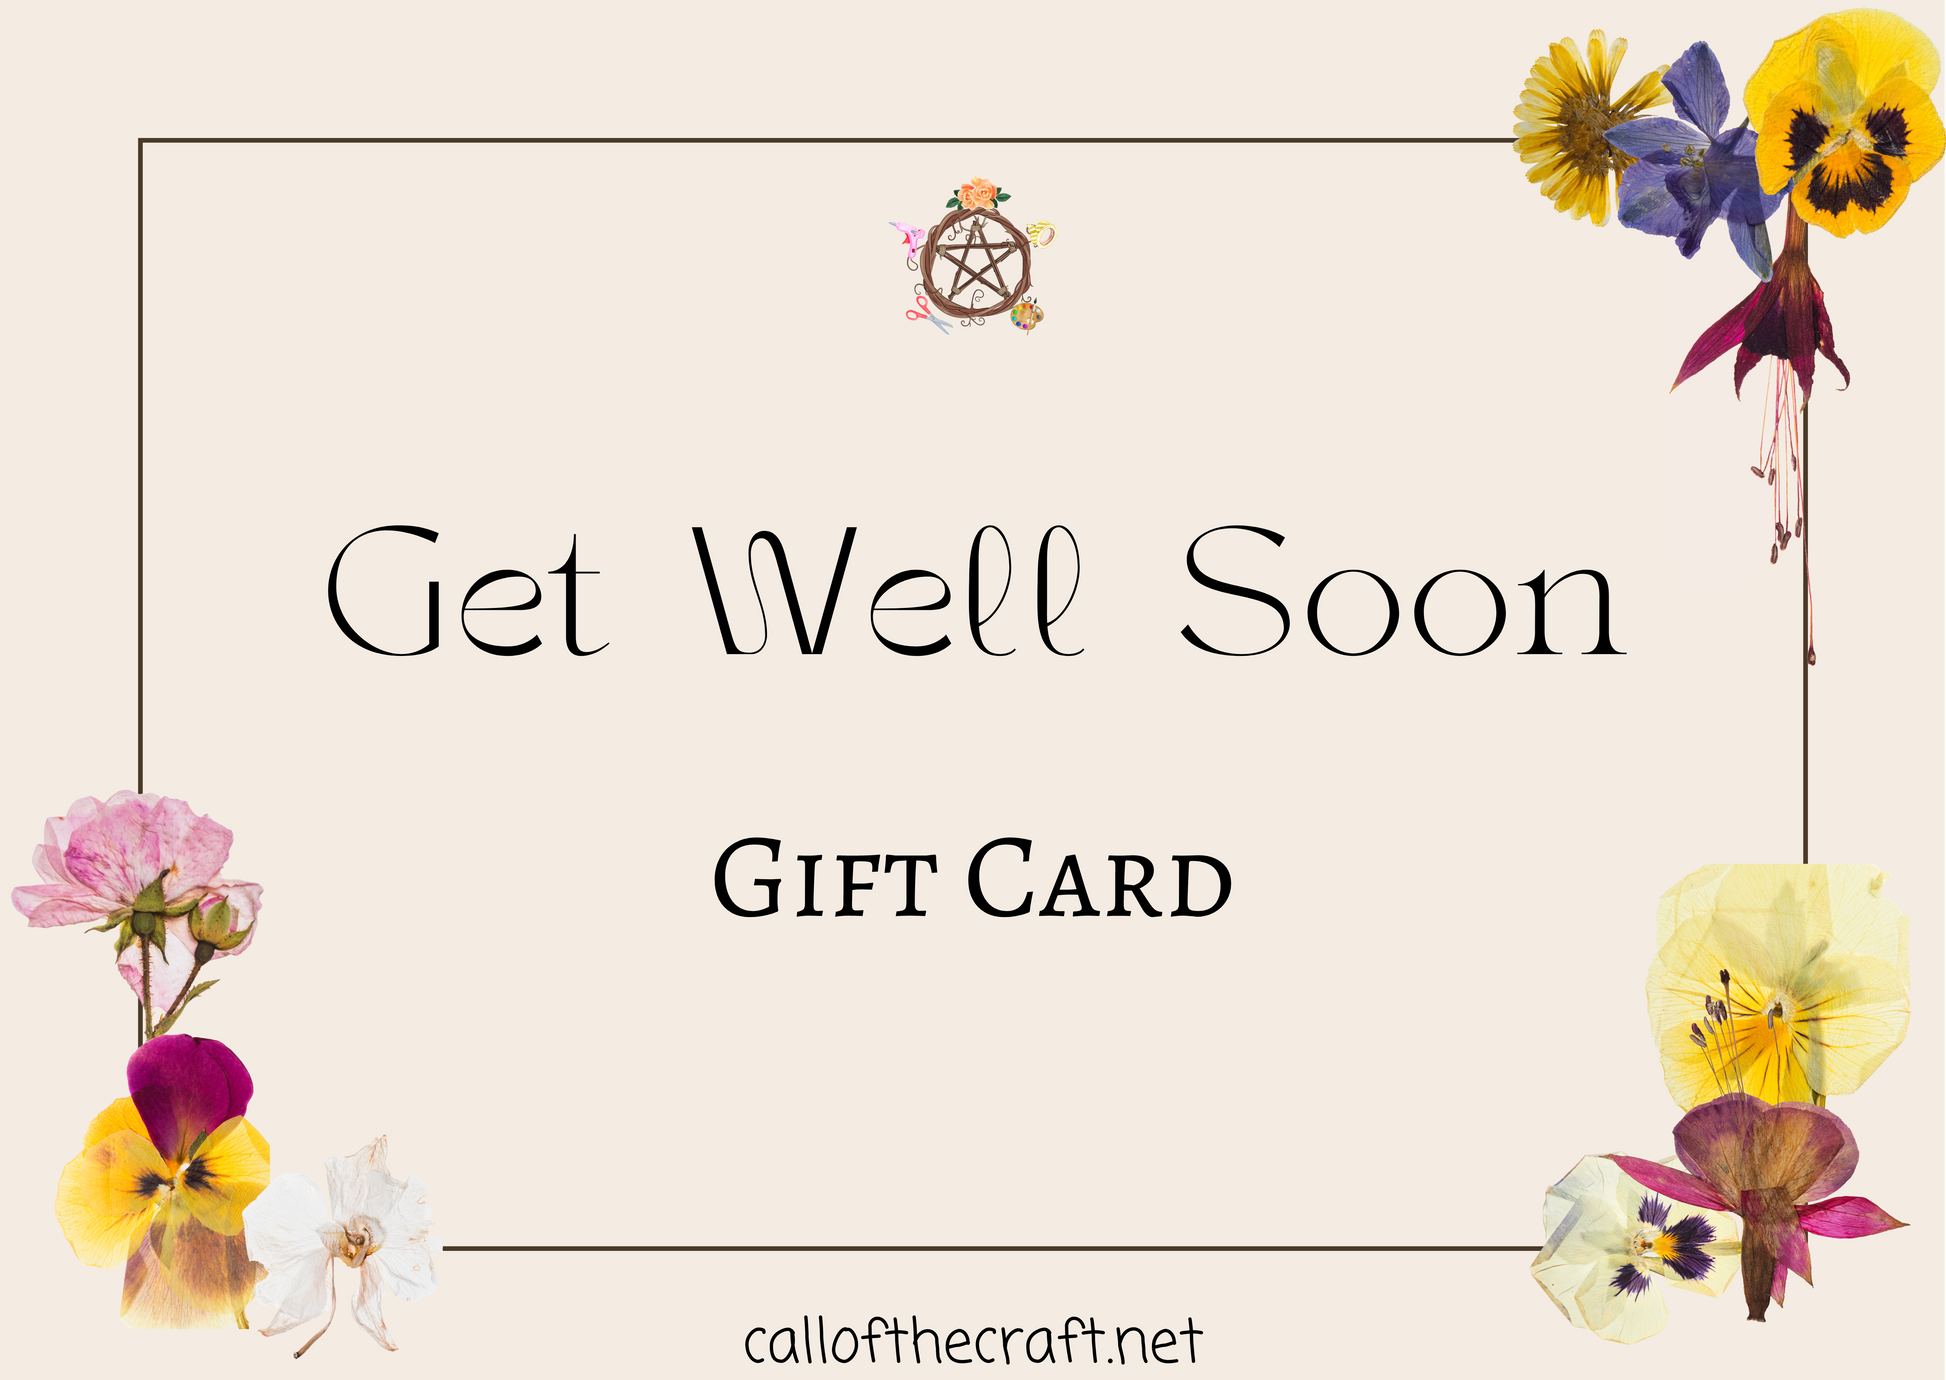 Get Well Gift Card - The Call of the Craft